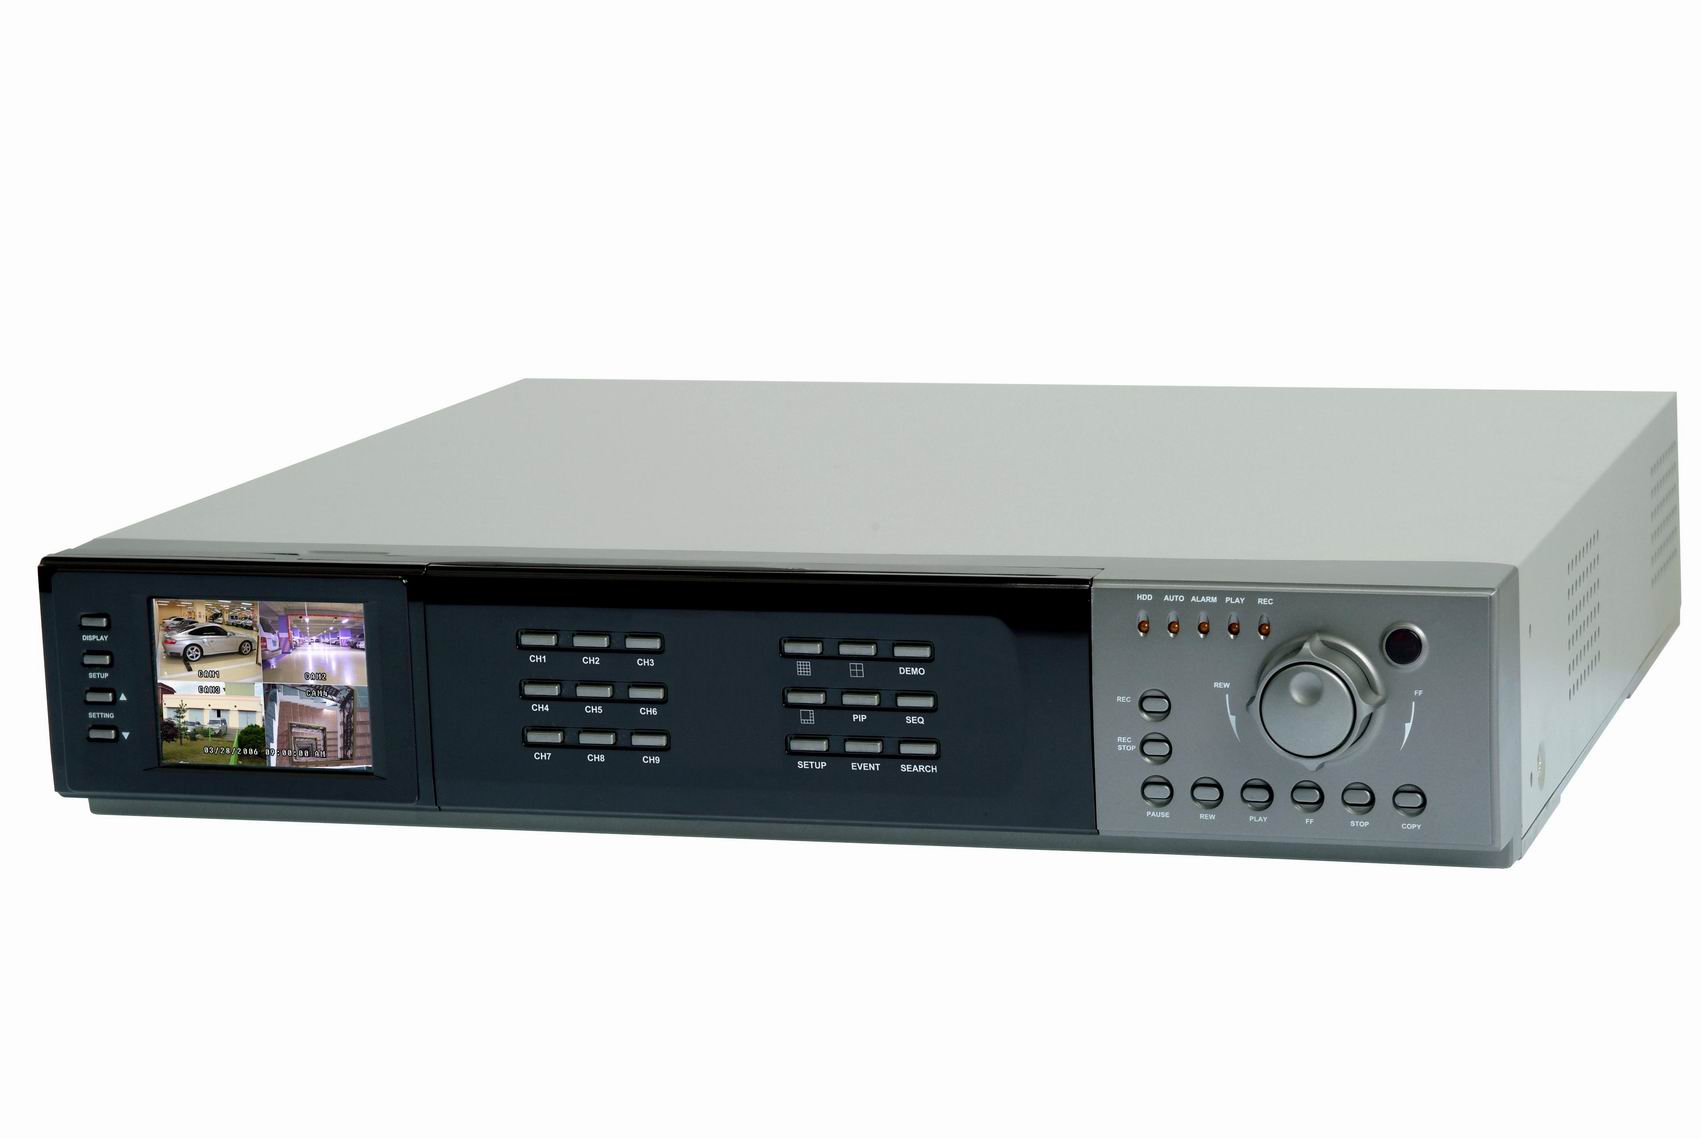 DVR Stand-Alone (9ch, MPEG4)-Bvr509 (DVR Stand-Alone (9ch, MPEG4)-Bvr509)